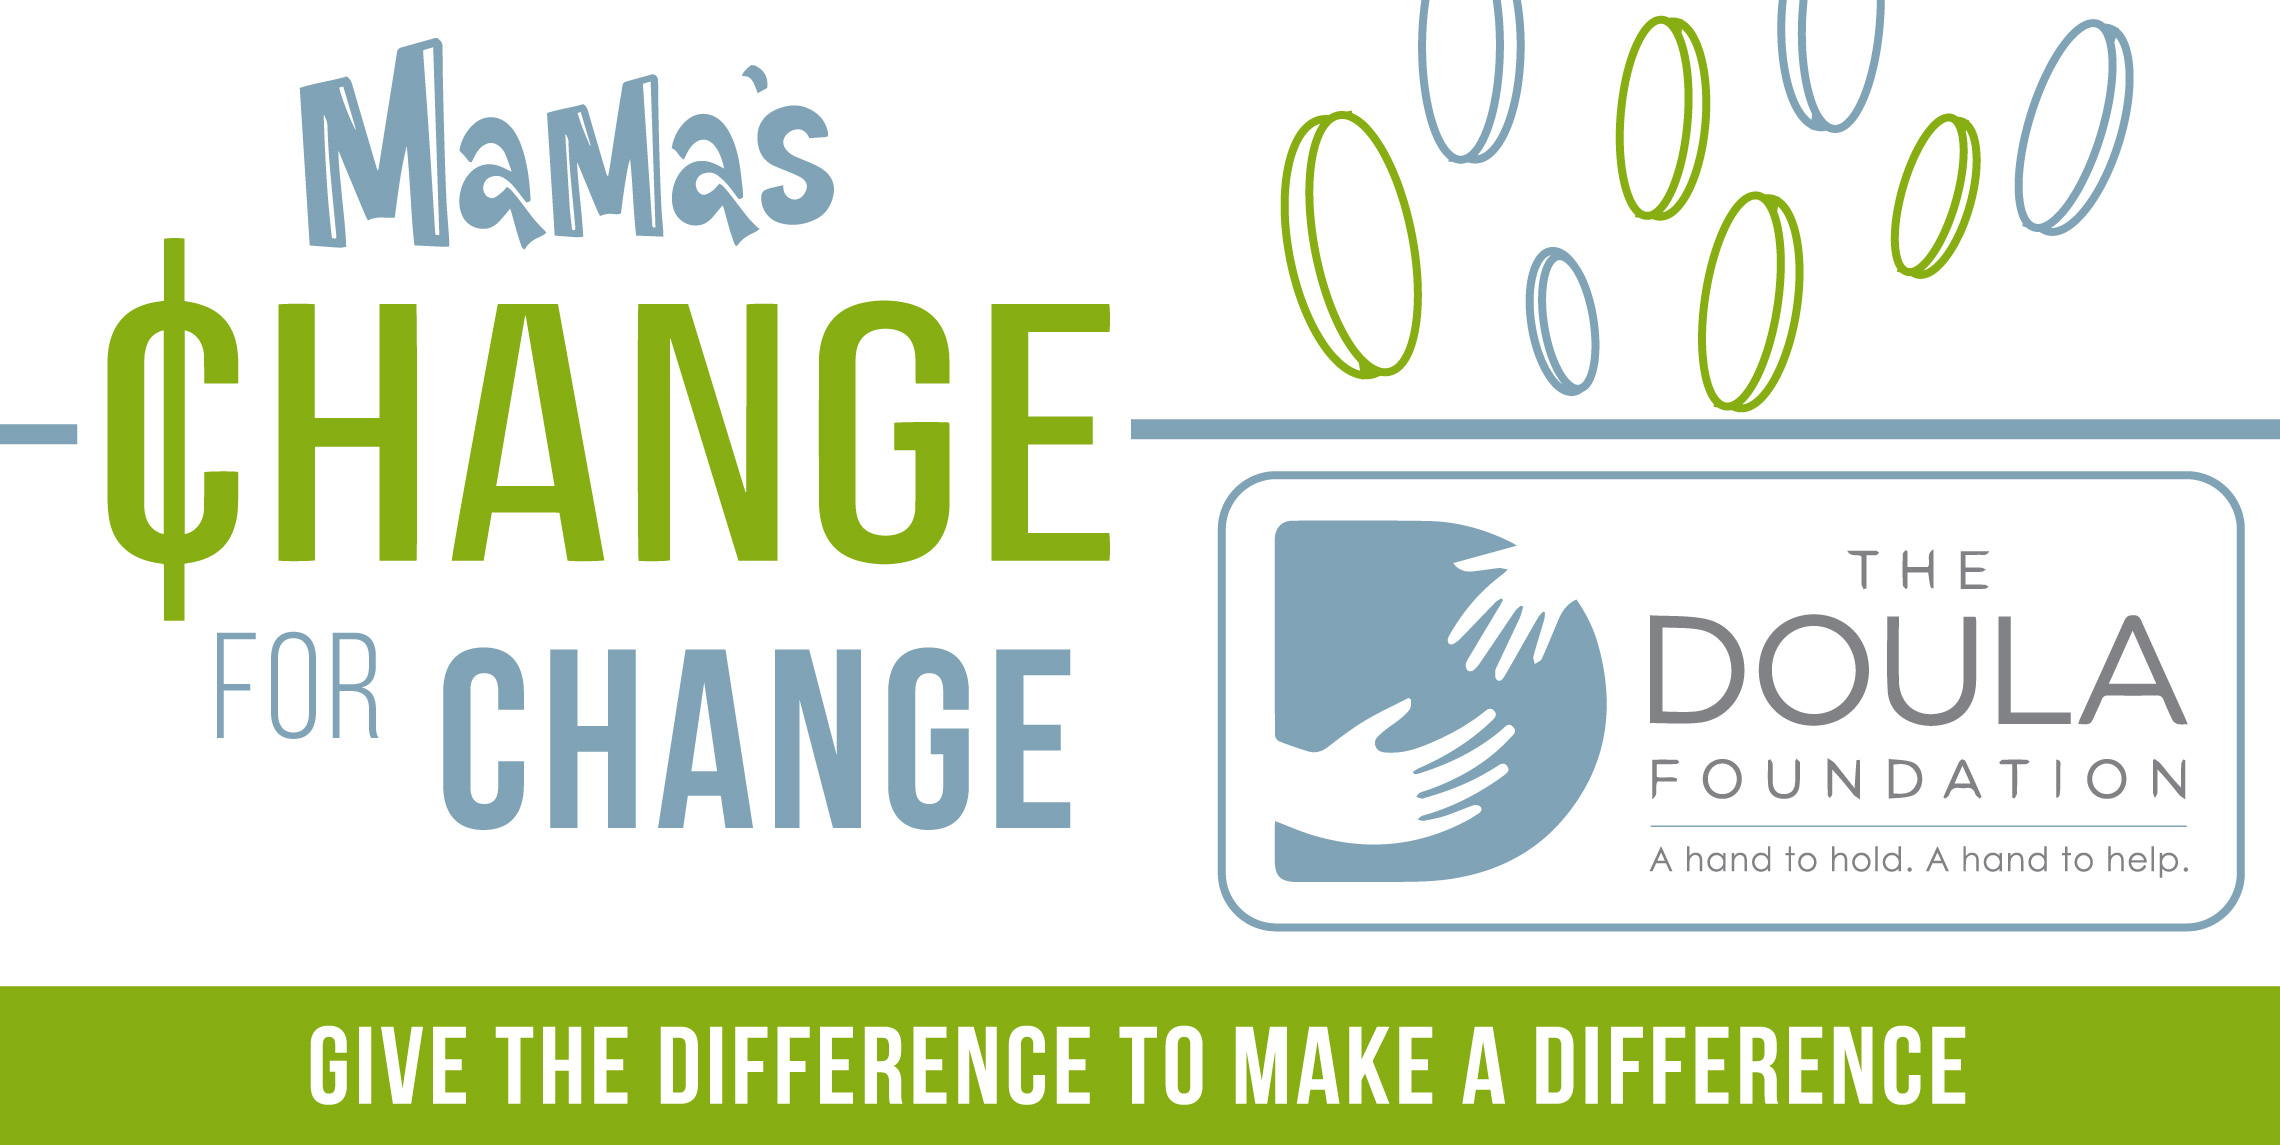 doula foundation, change for change, donate